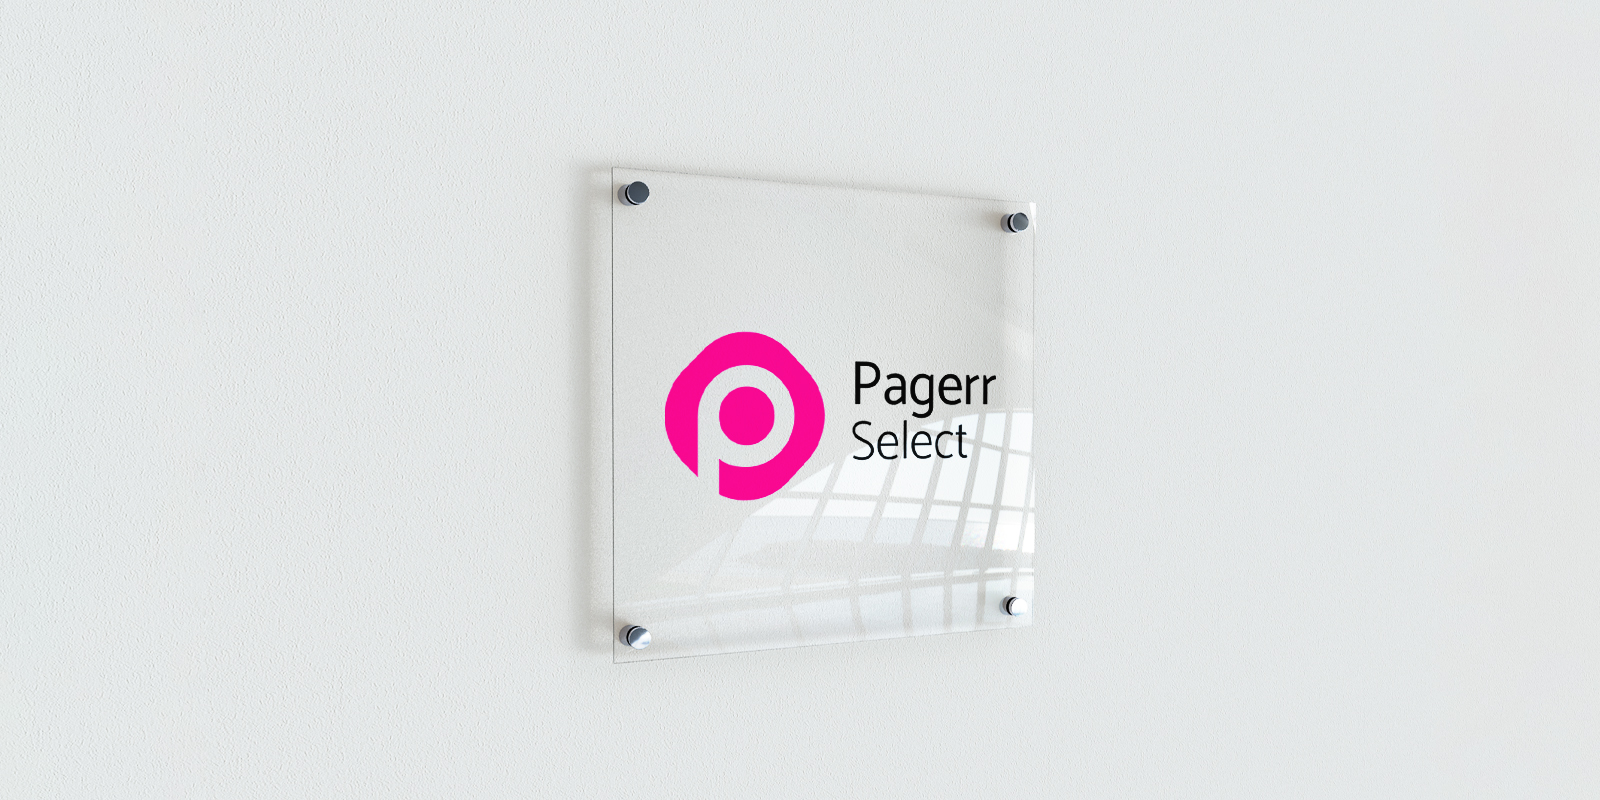 Acrylic signs in Bucharest - Print with Pagerr